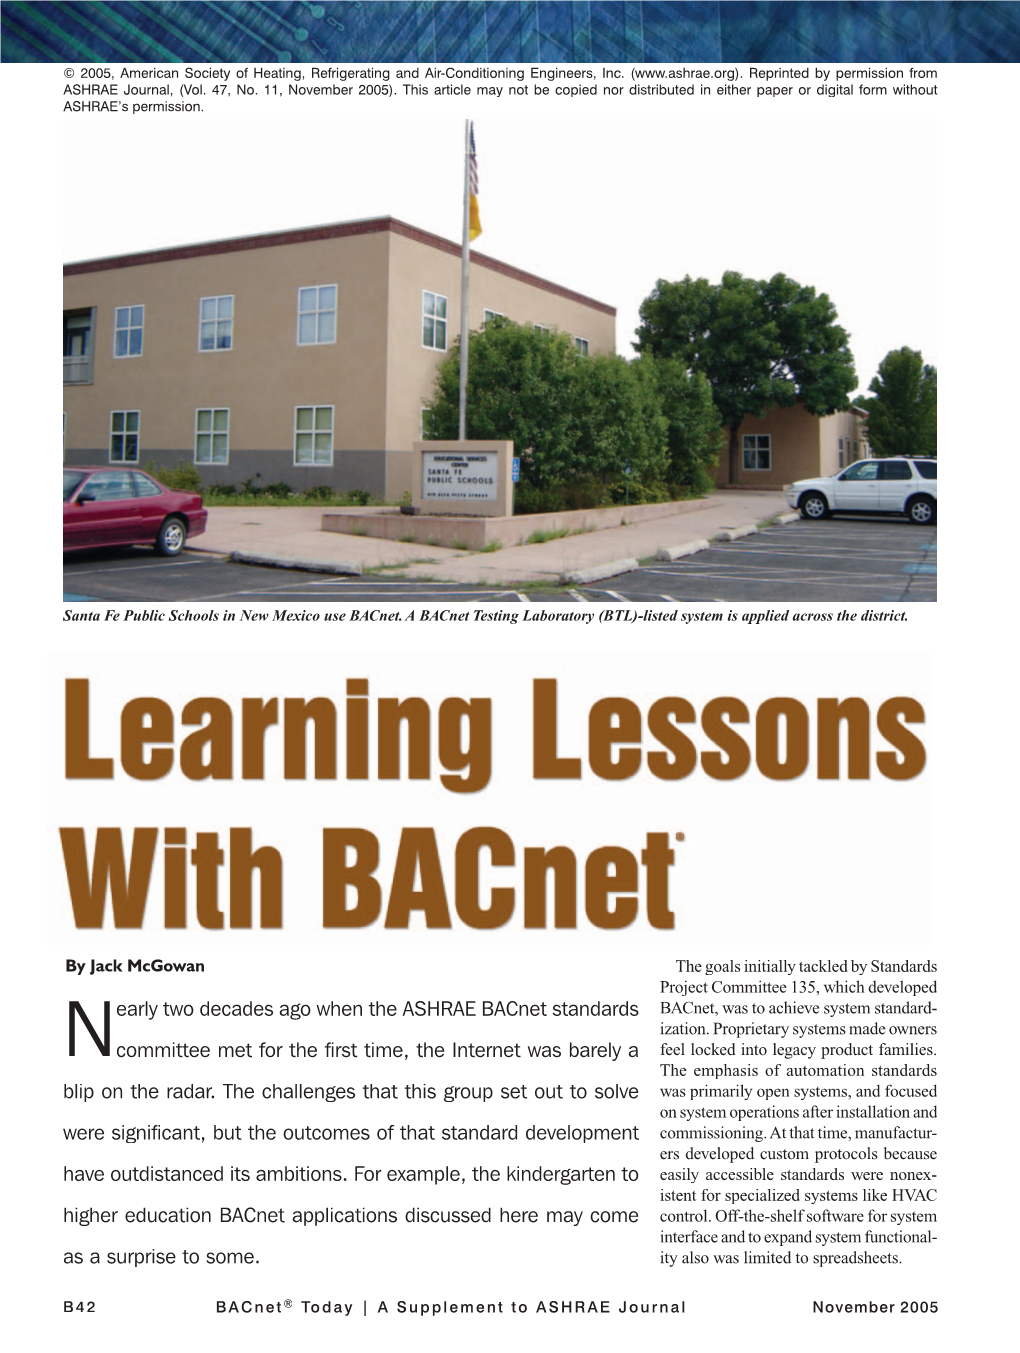 Learning Lessons with Bacnet